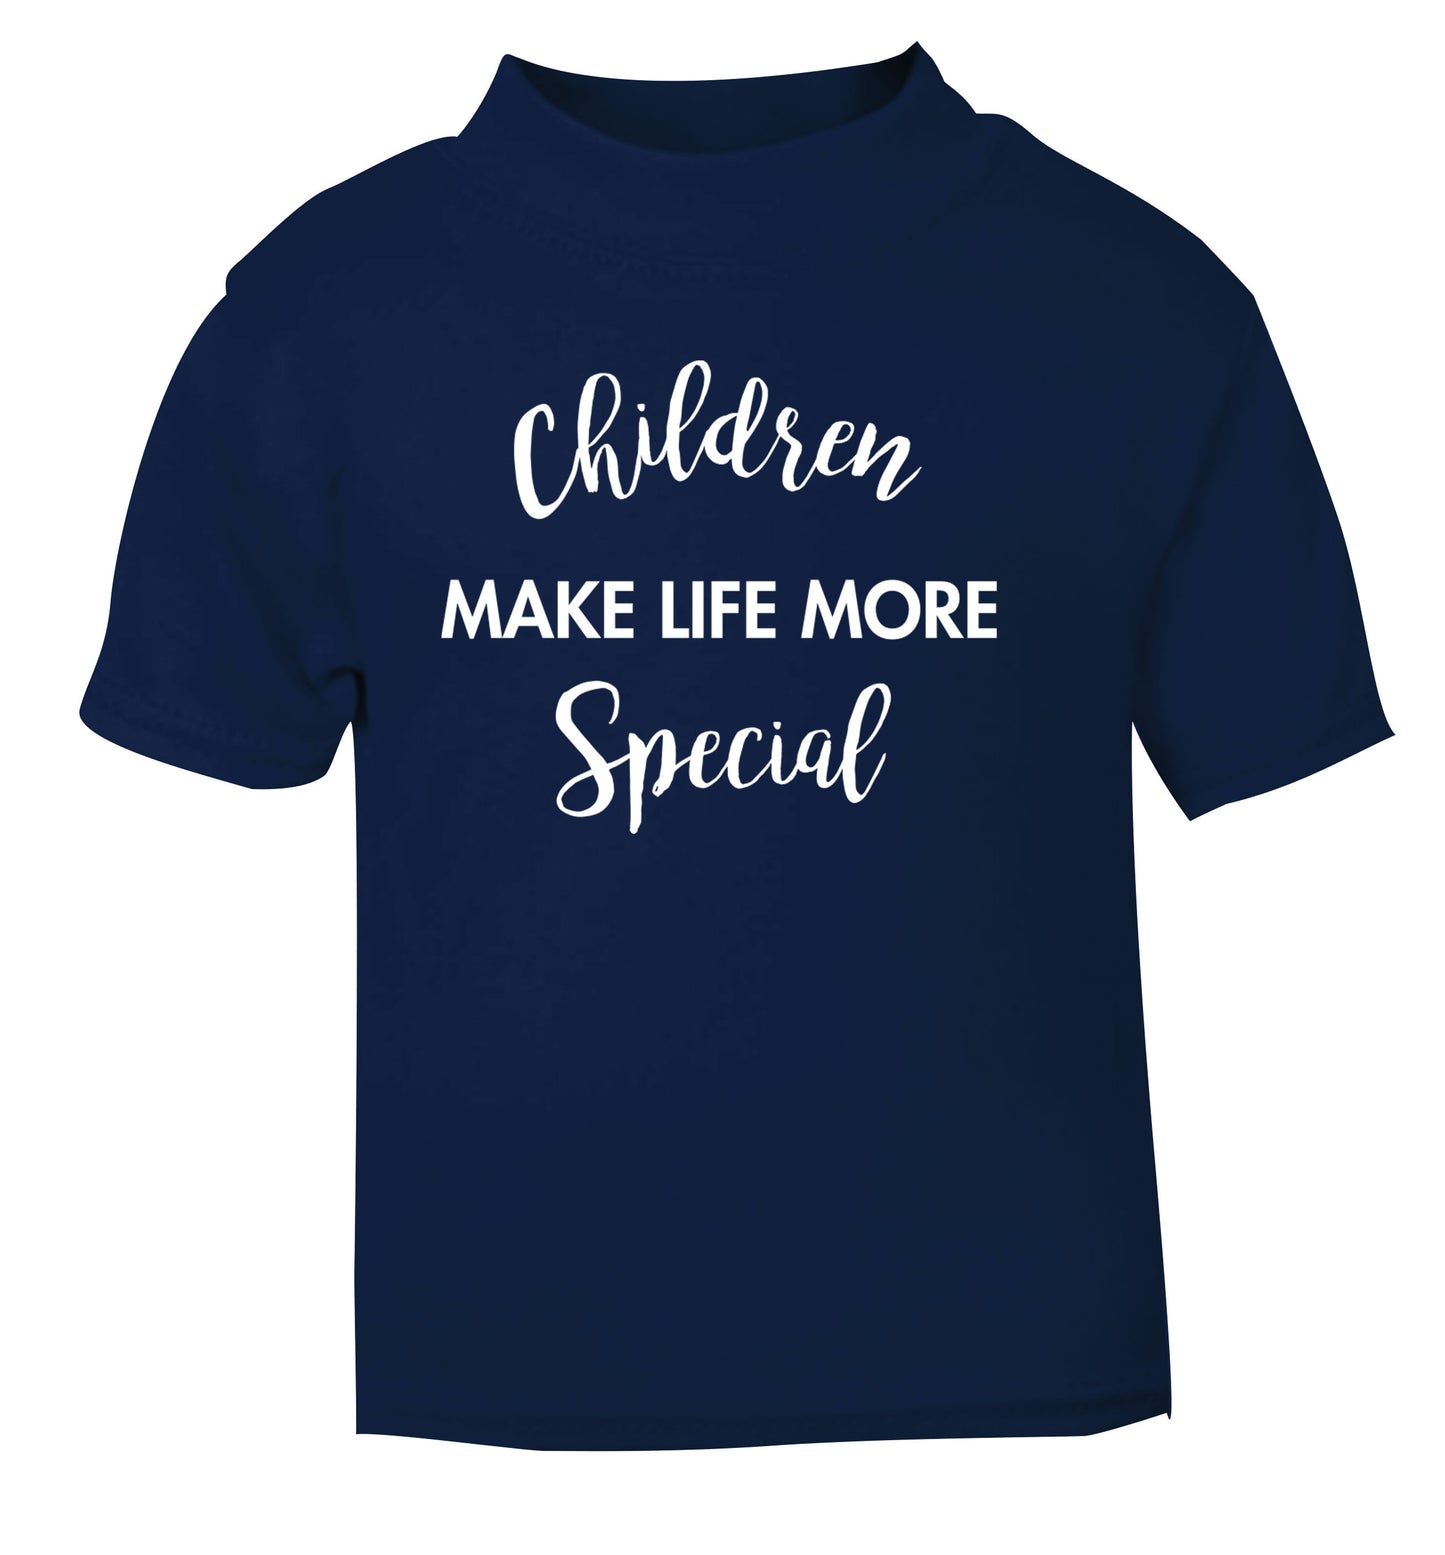 Children make life more special navy Baby Toddler Tshirt 2 Years